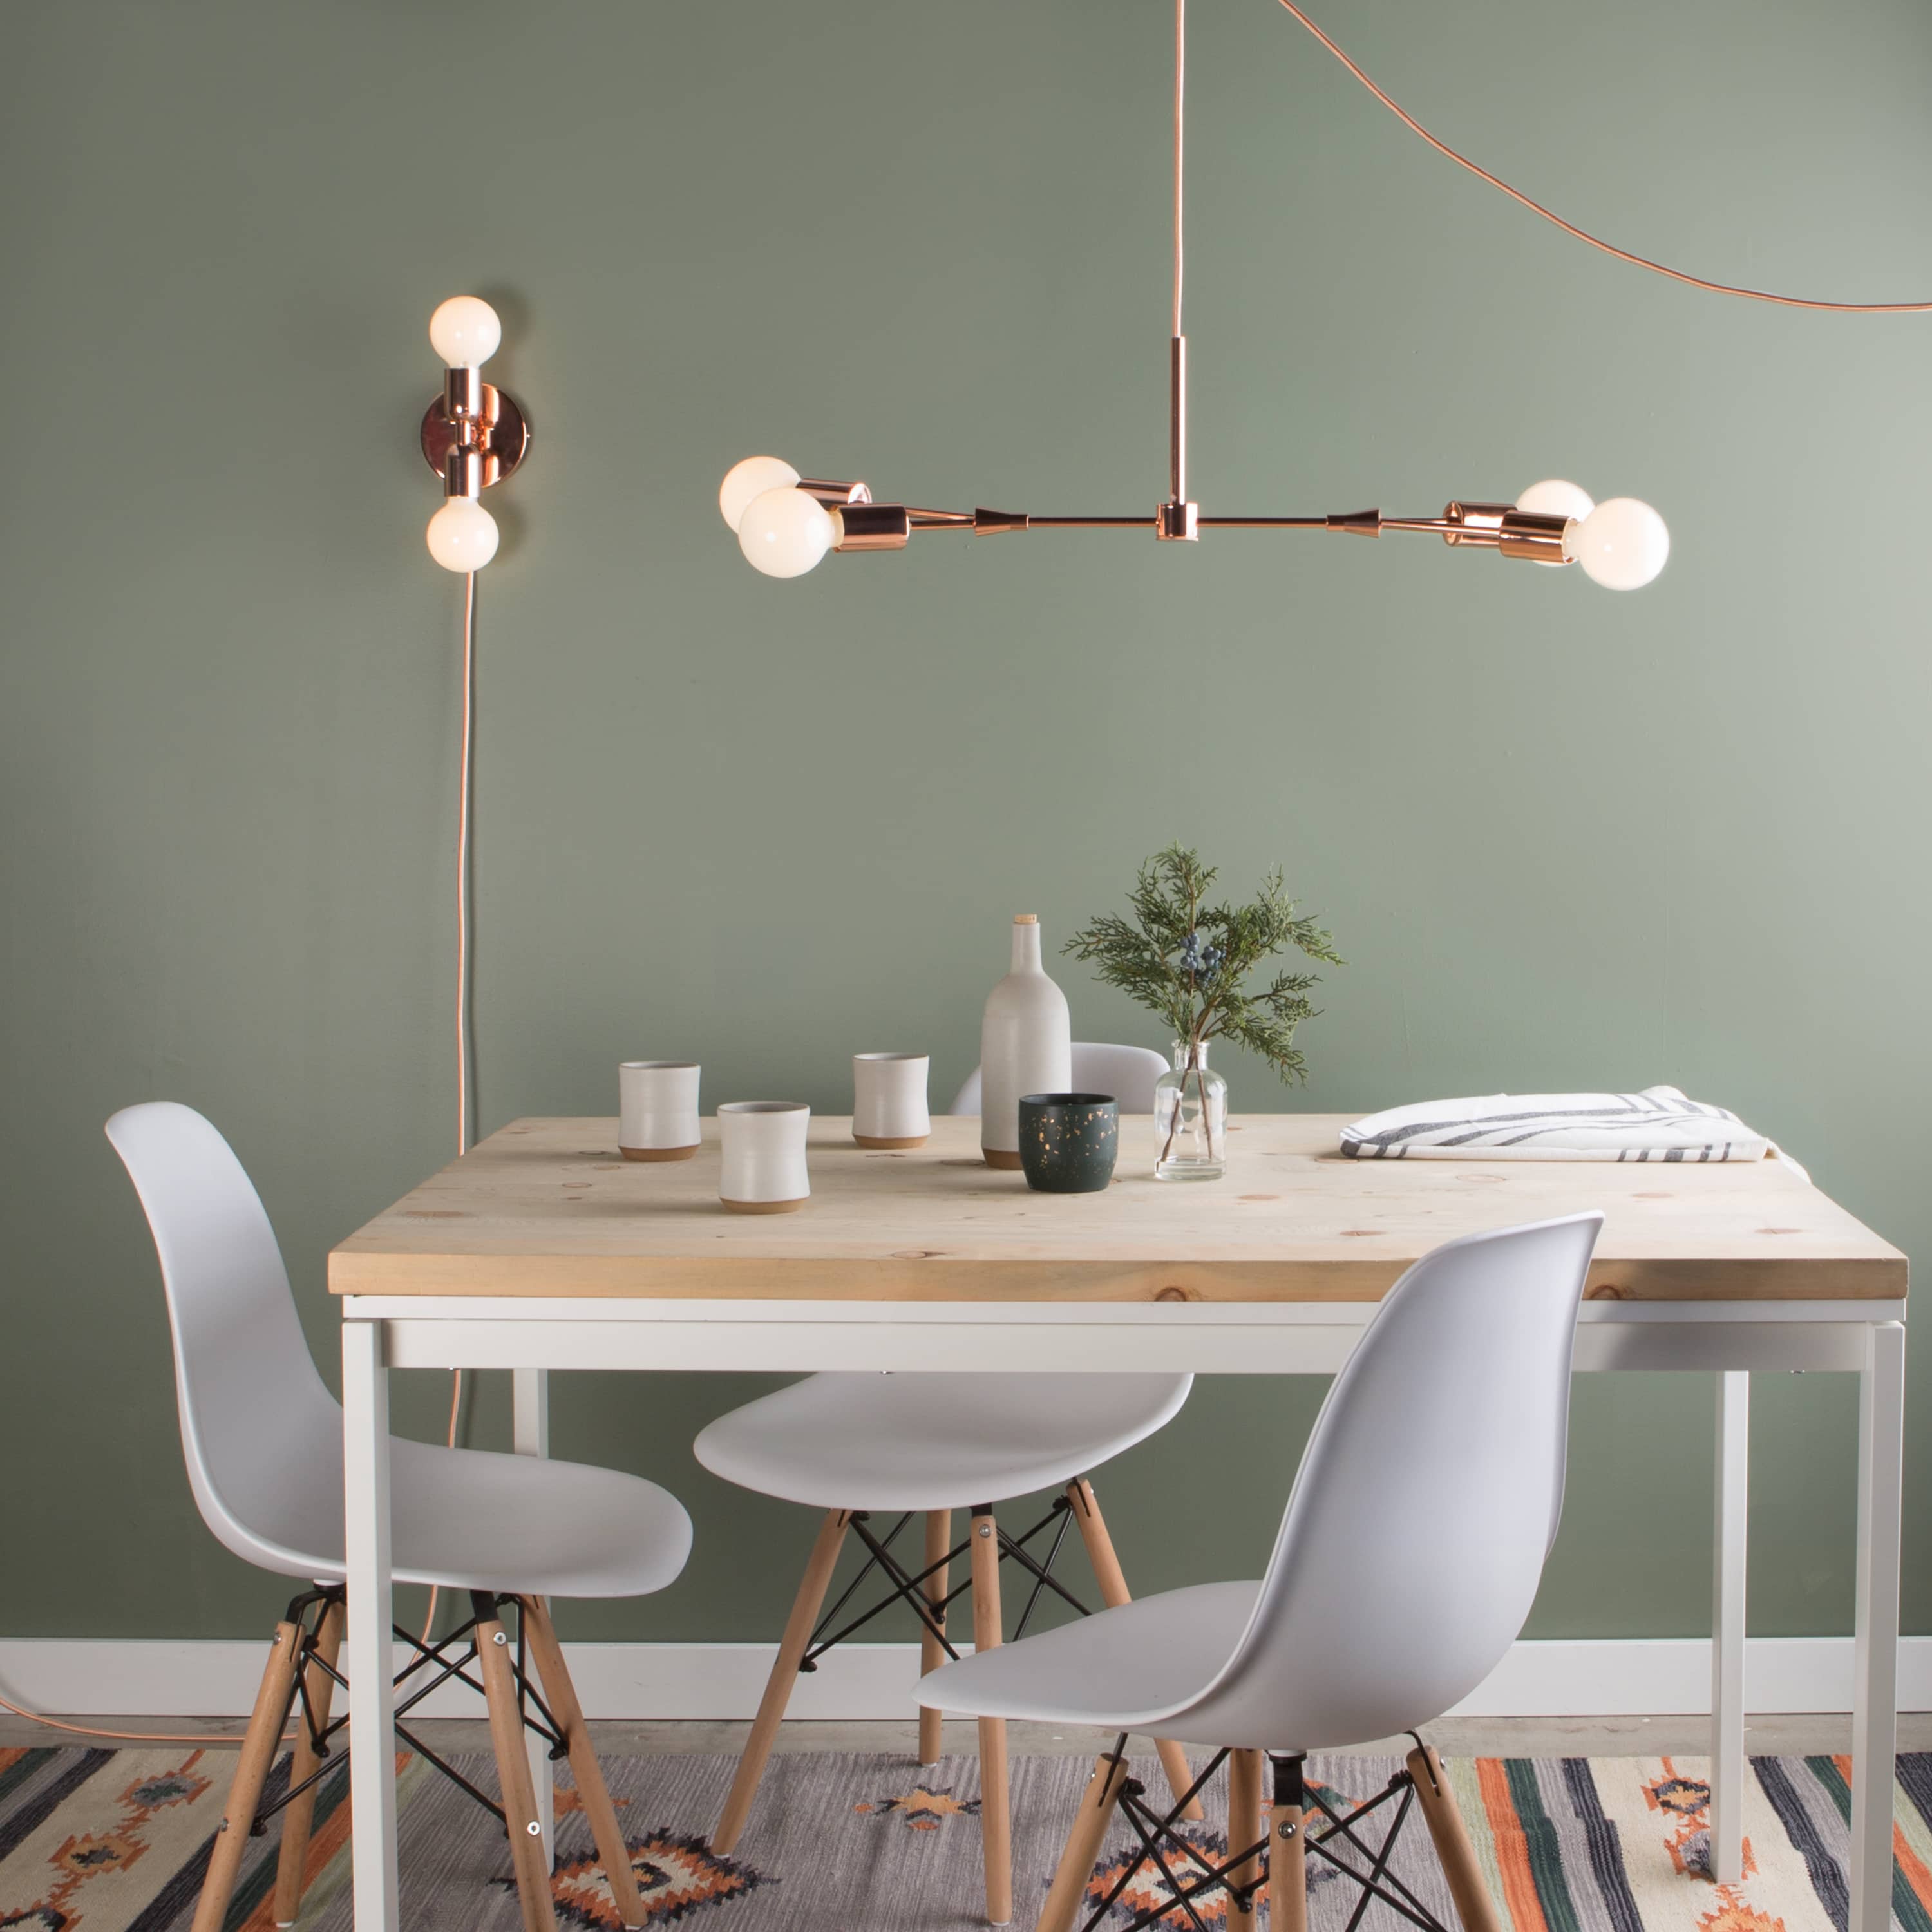 Dining room setting featuring Junction Mini Duo Plug-In Sconce on the wall and a Twig Chandelier above the table.